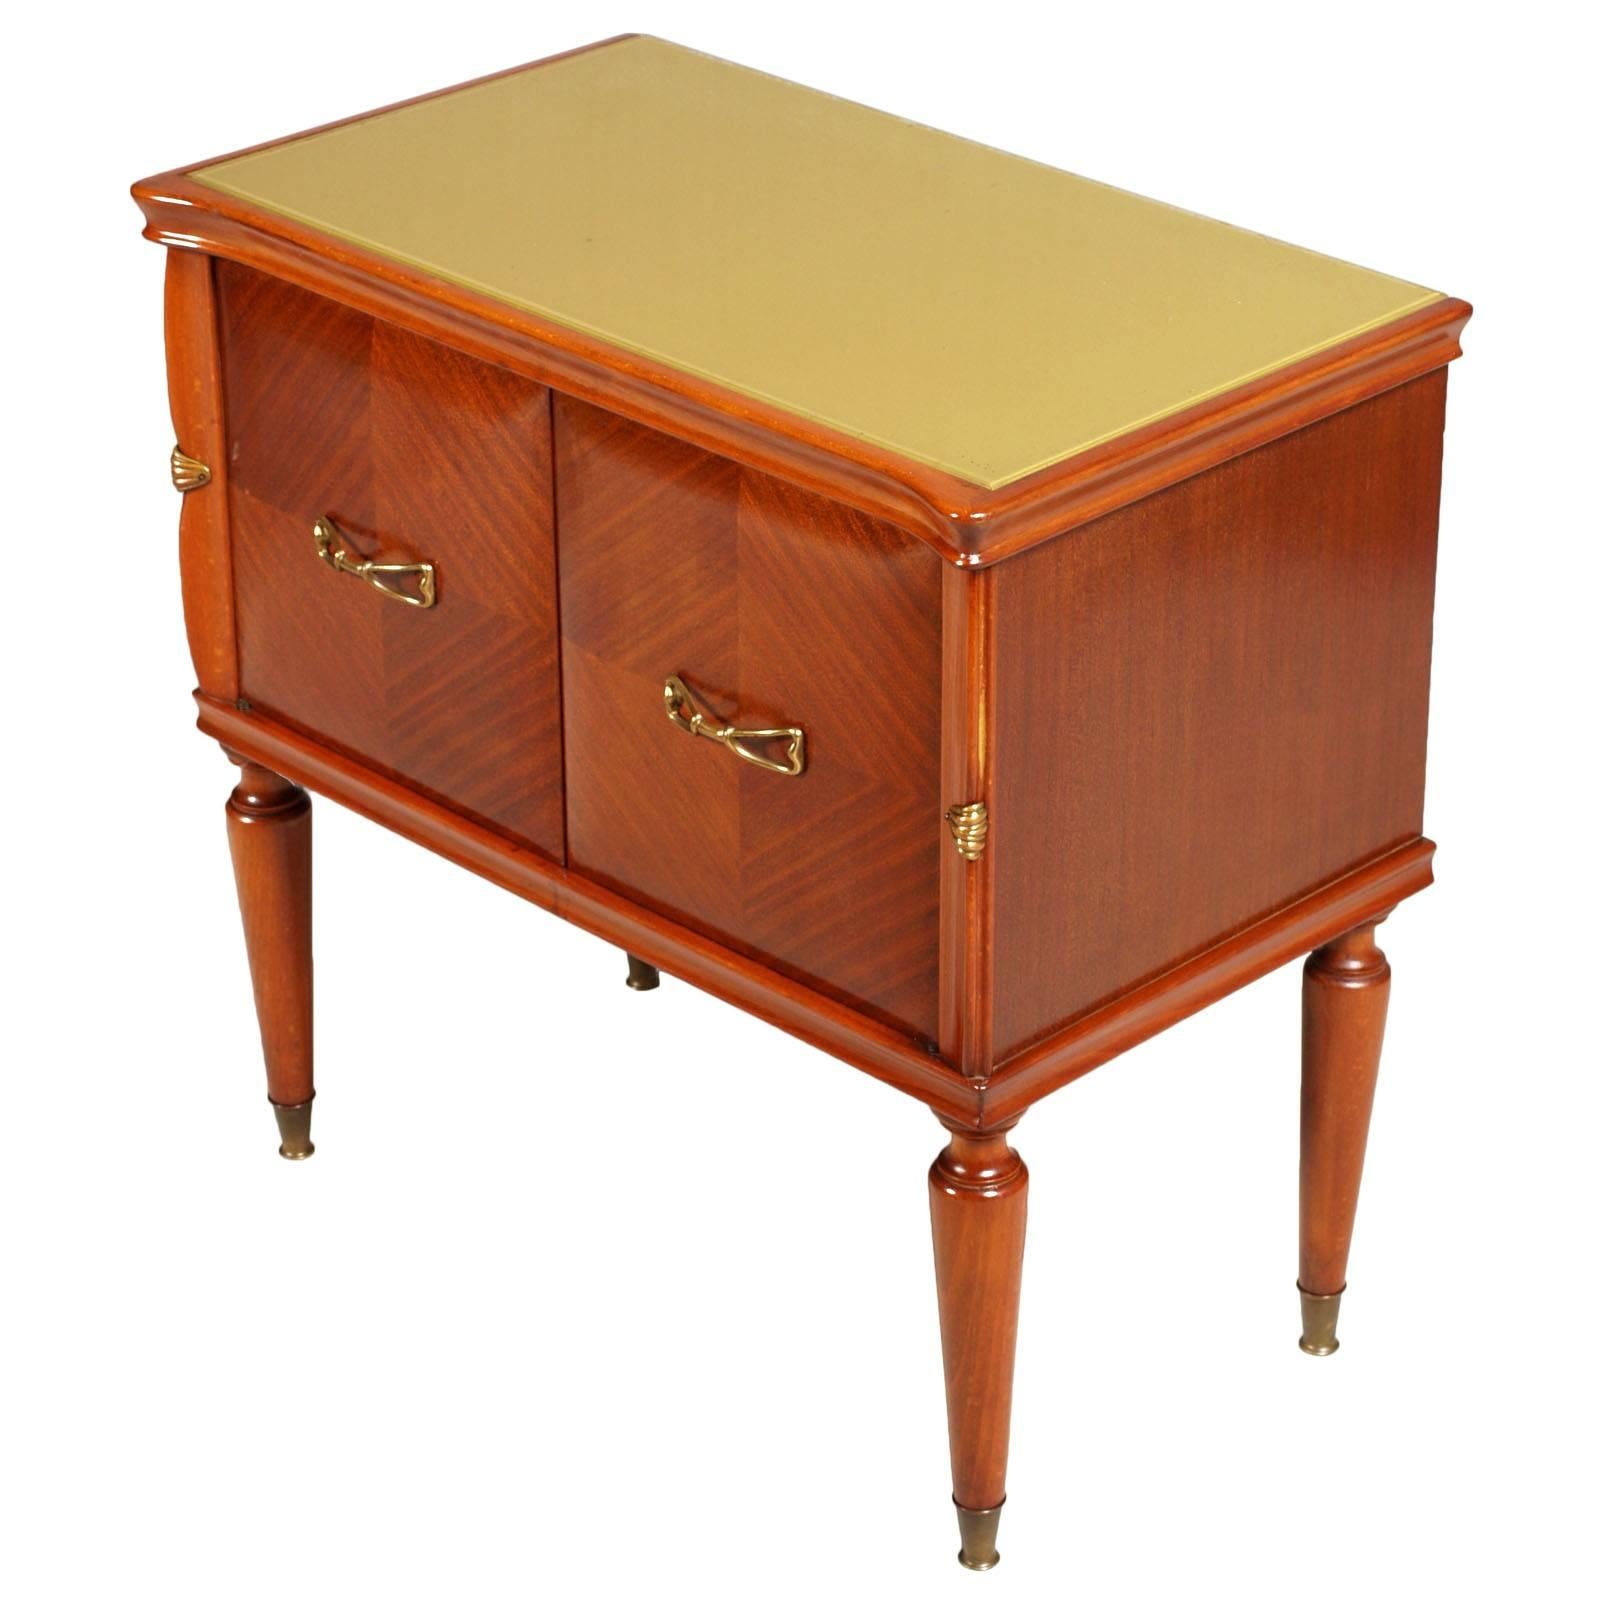 Very elegant 1950s, Italian nightstands bedside tables Gio Ponti style in walnut and veneer walnut with accessories and decorations in gilded brass. Top in painted crystal
Manufactured in Cantù. We can sell separately

Measures cm: H 58, W 60, D 35.